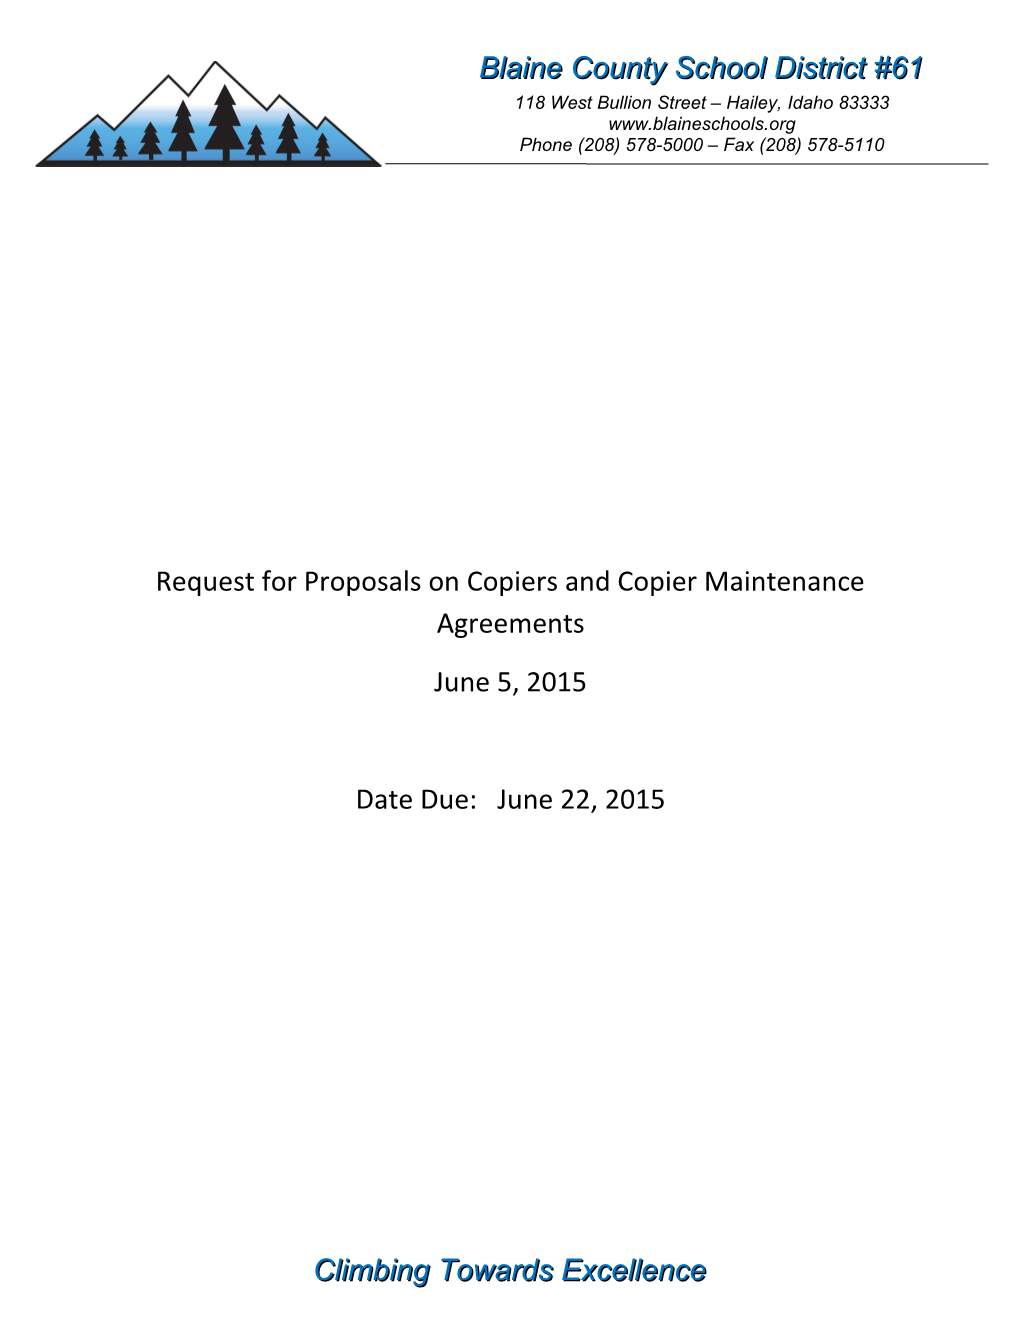 Request for Proposals on Copiers and Copier Maintenance Agreements